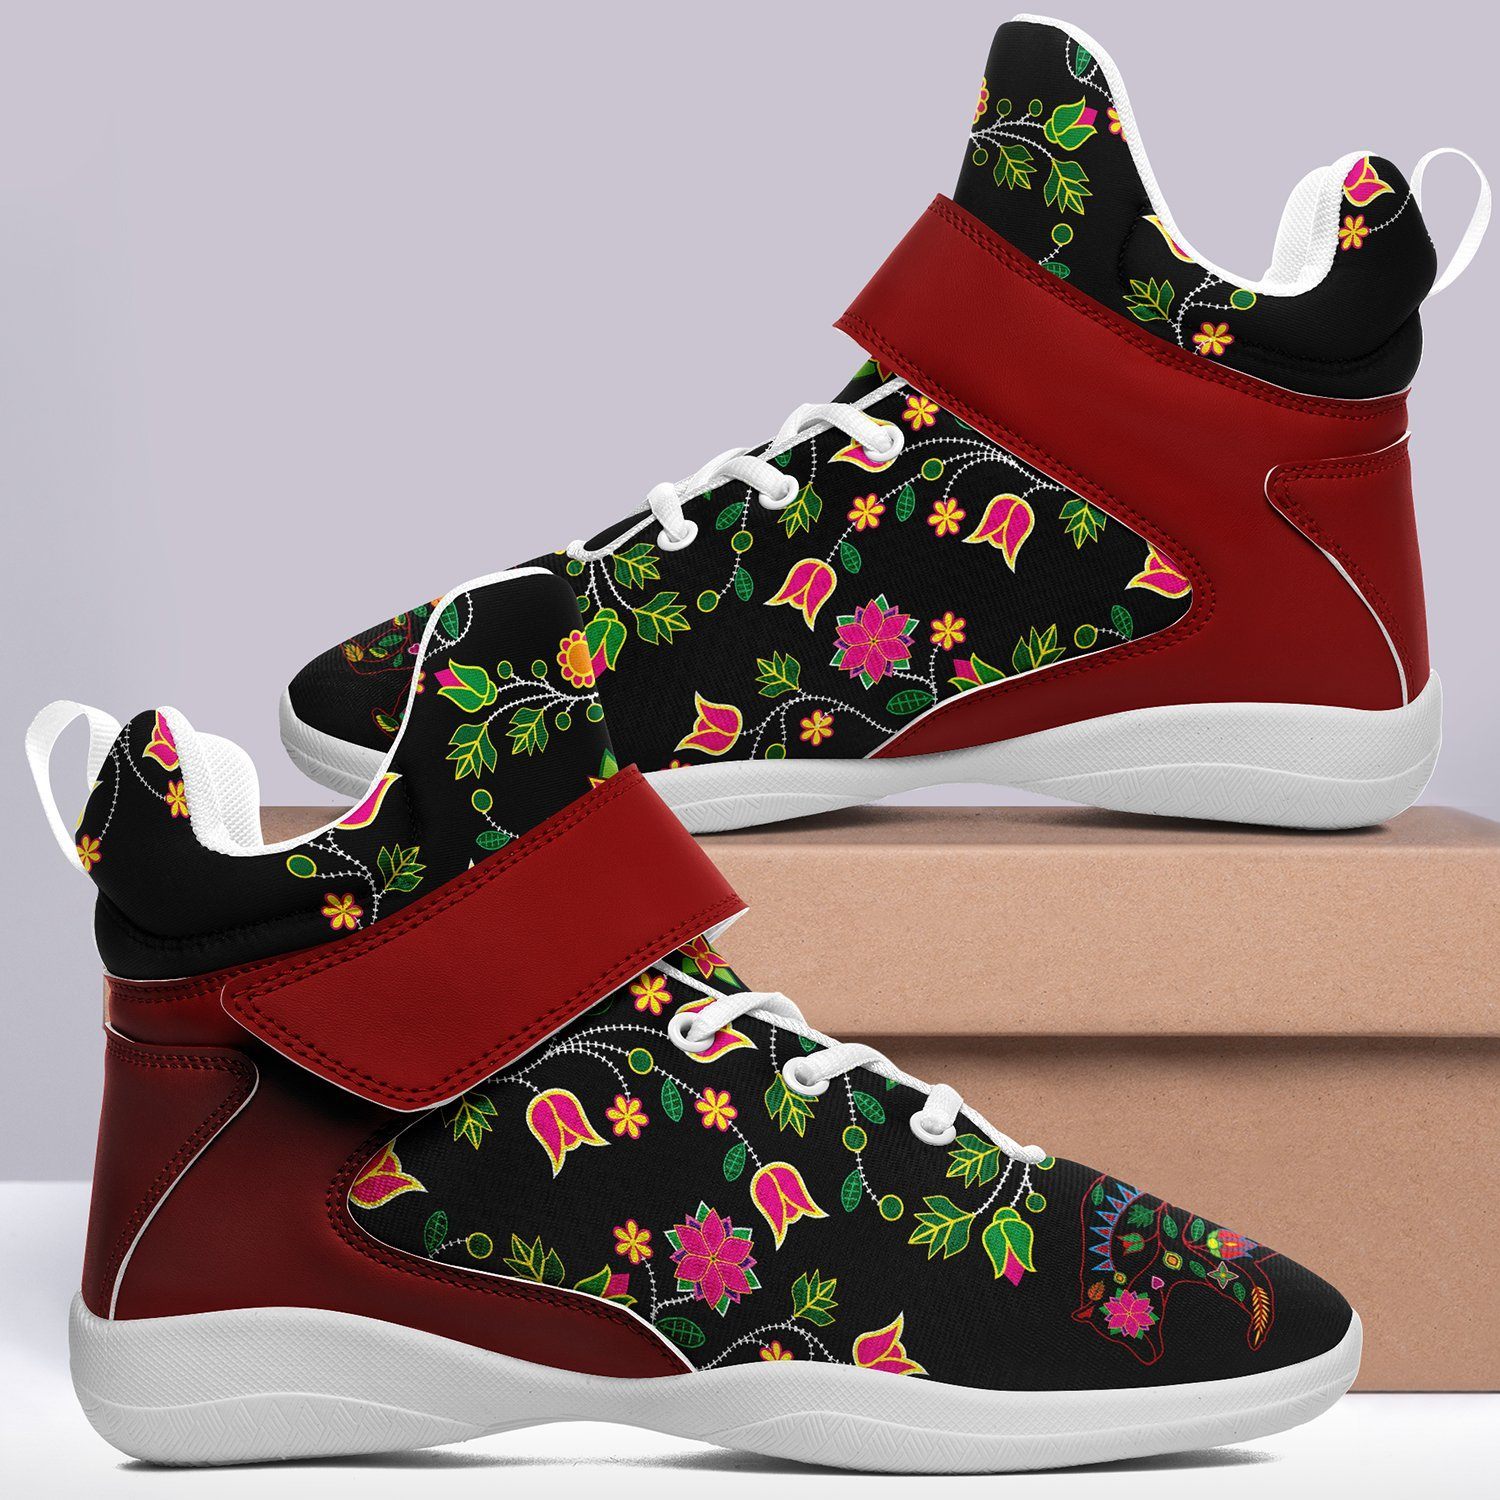 Floral Bear Ipottaa Basketball / Sport High Top Shoes - White Sole 49 Dzine 